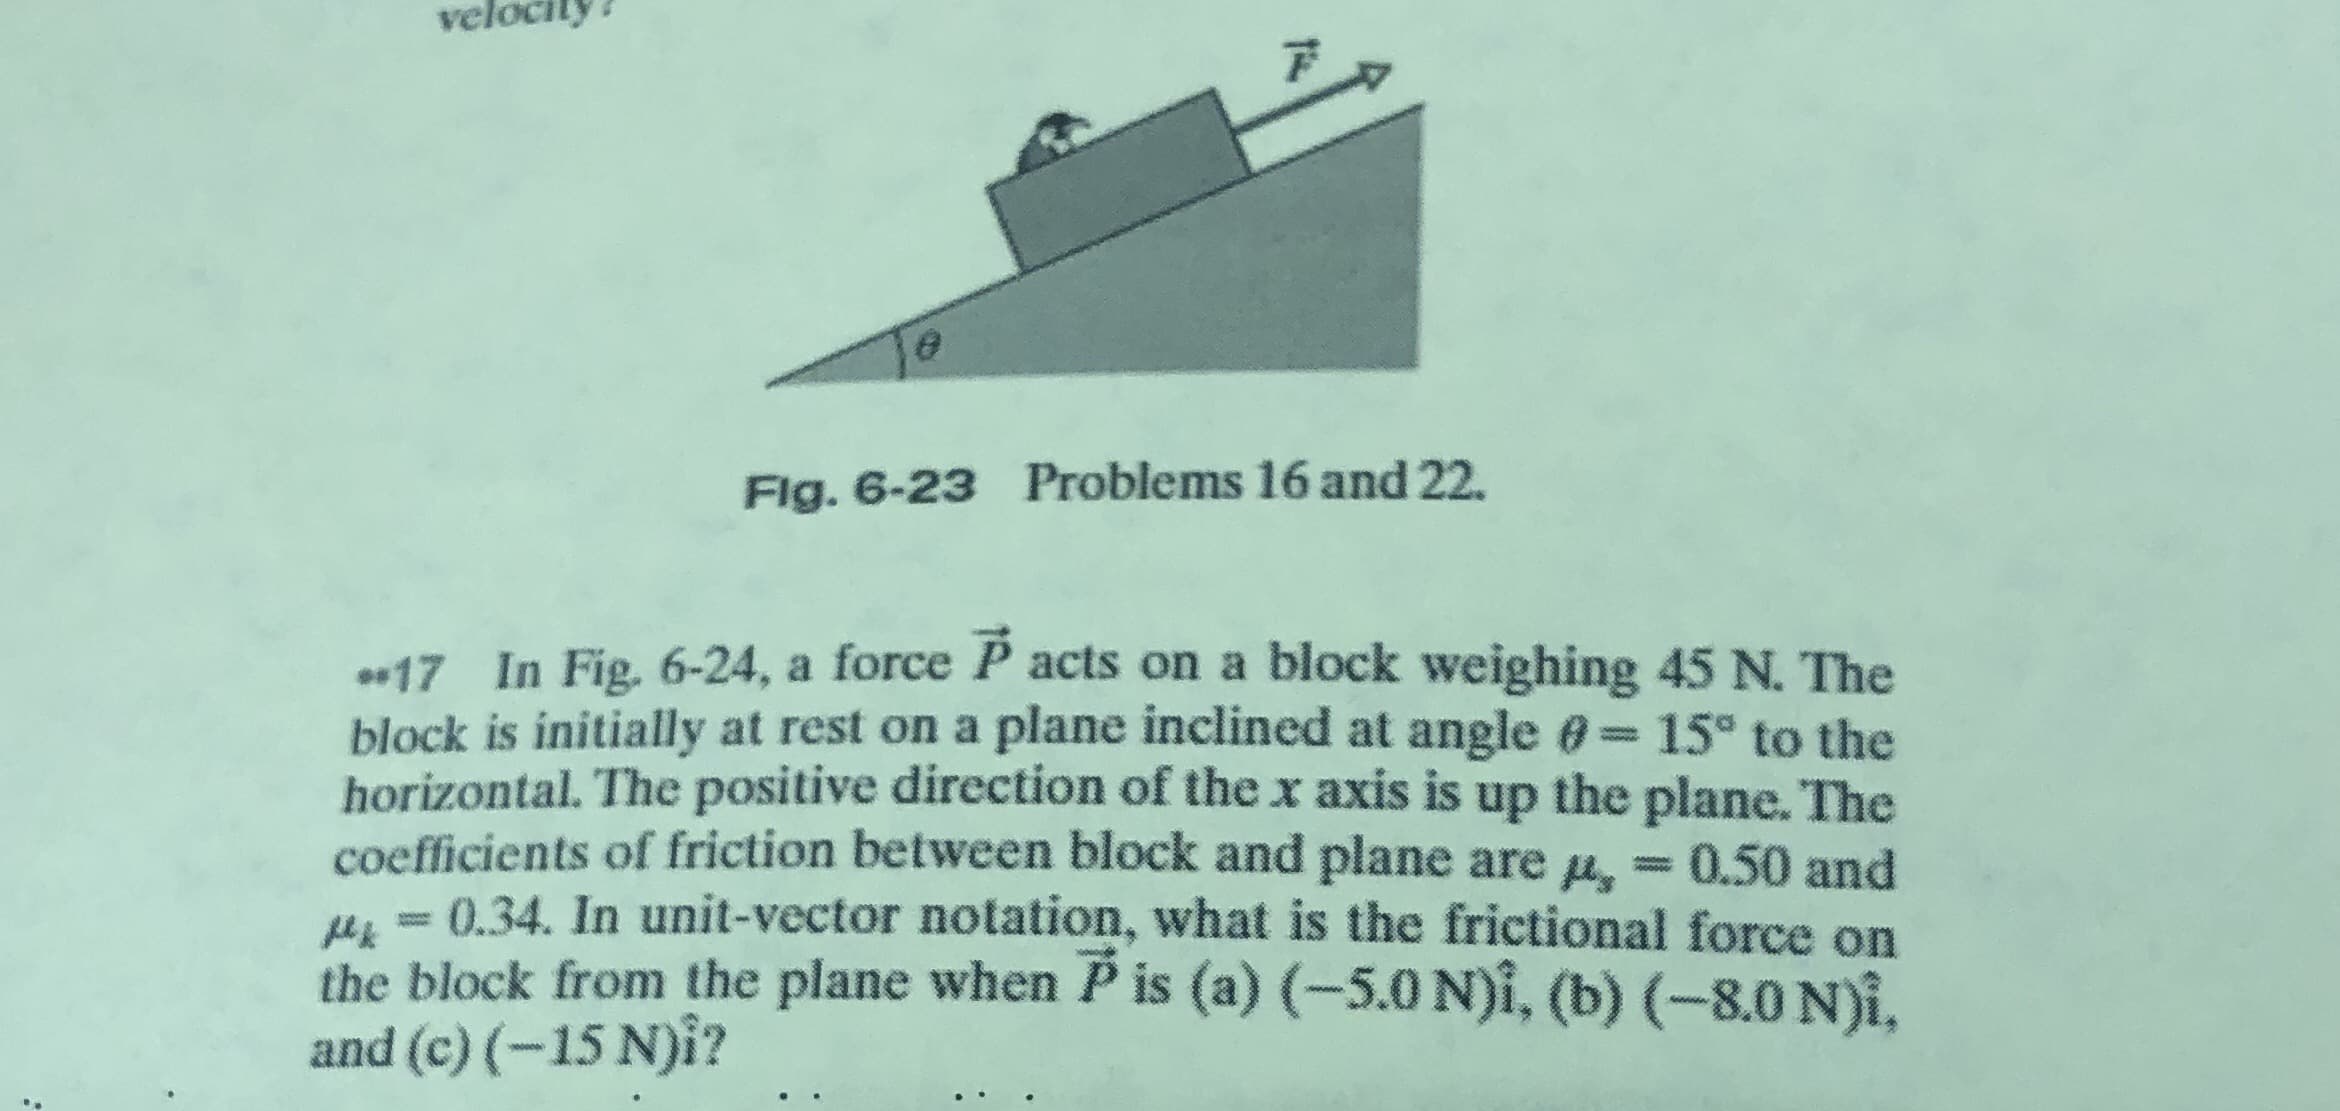 vel
Flg. 6-23 Problems 16 and 22.
17 In Fig. 6-24, a force P acts on a block weighing 45 N. The
block is initially at rest on a plane inclined at angle 0 15° to the
horizontal. The positive direction of the x axis is up the plane. The
coefficients of friction between block and plane are u,
u = 0.34. In unit-vector notation, what is the frictional force on
the block from the plane when P is (a) (-5.0 N)i, (b) (-8.0 N)i,
and (c) (-15 N)i?
0.50 and
0000
